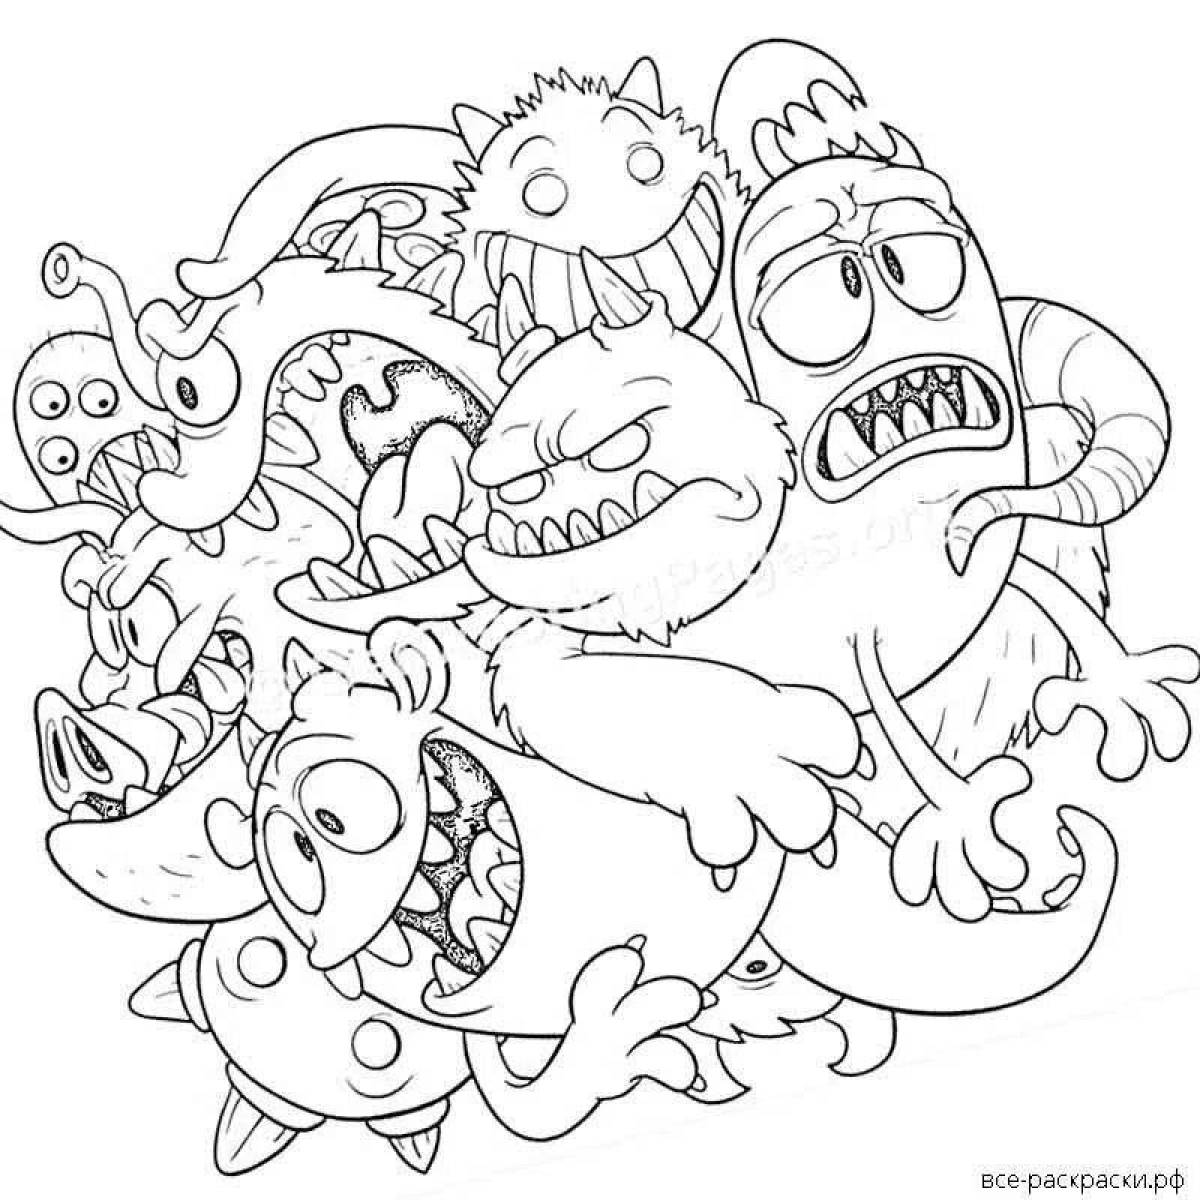 Glorious rainbow monsters coloring page